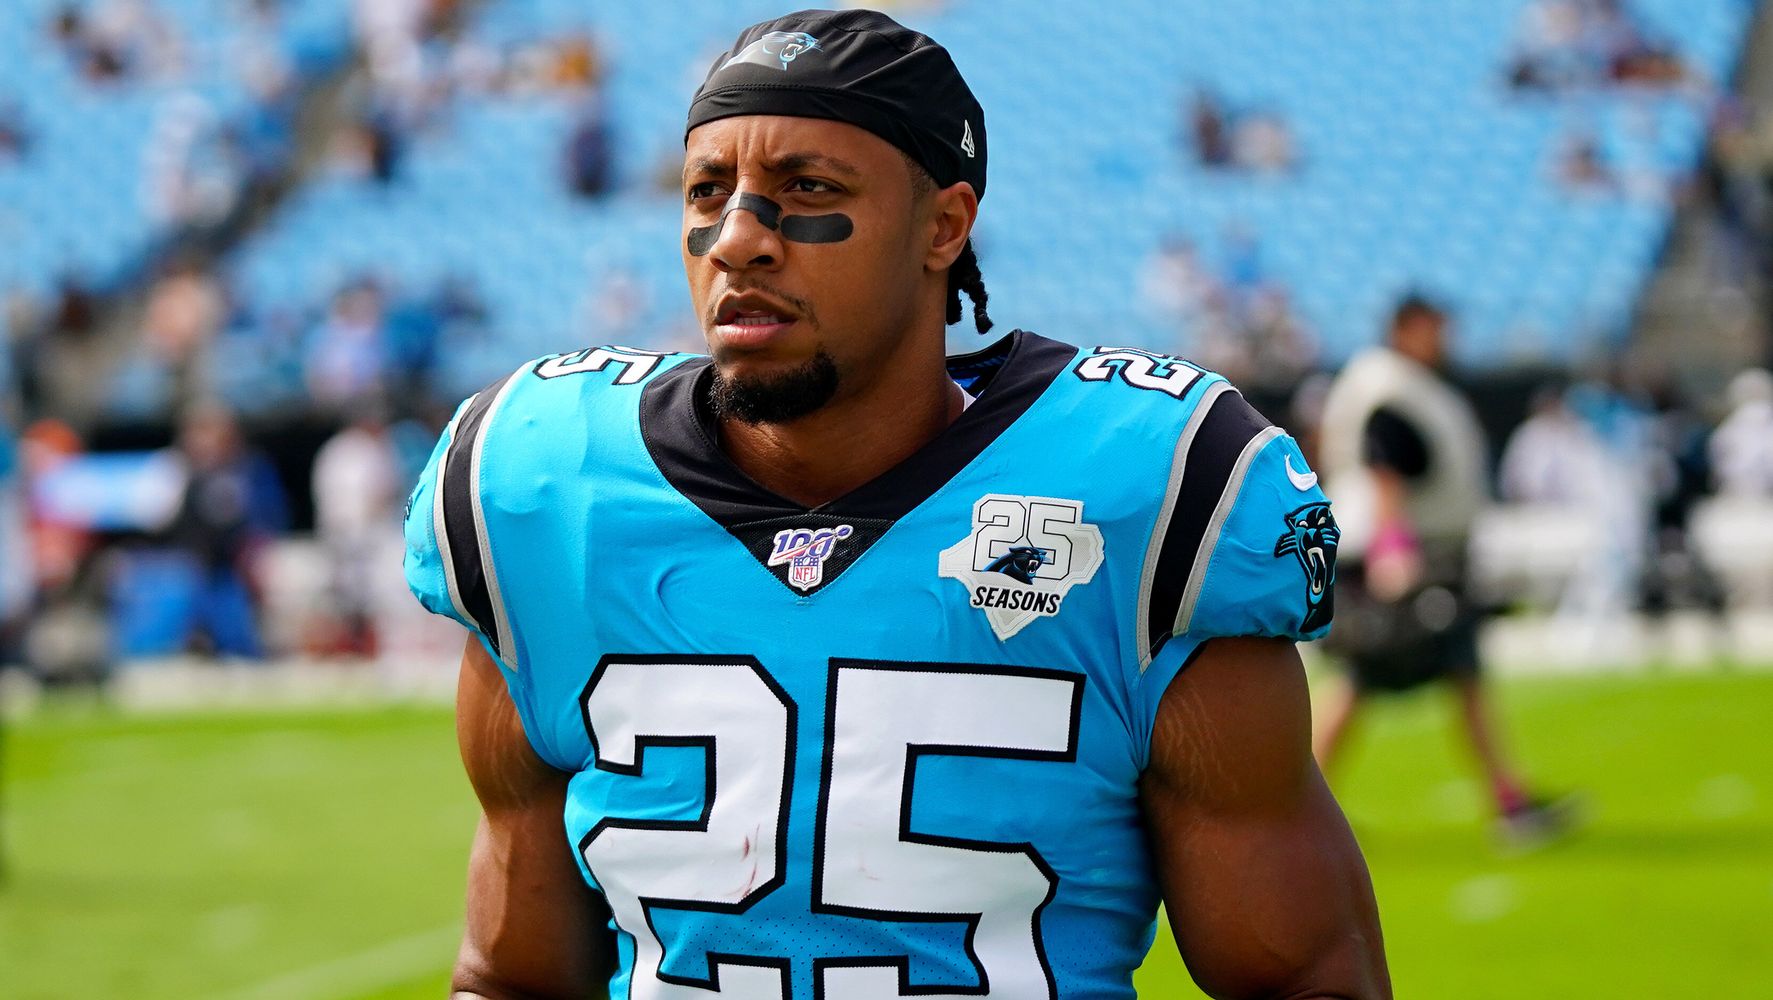 Eric Reid Slams NFL For Using 'Race-Norming' To Determine Brain Injury Claim Payouts